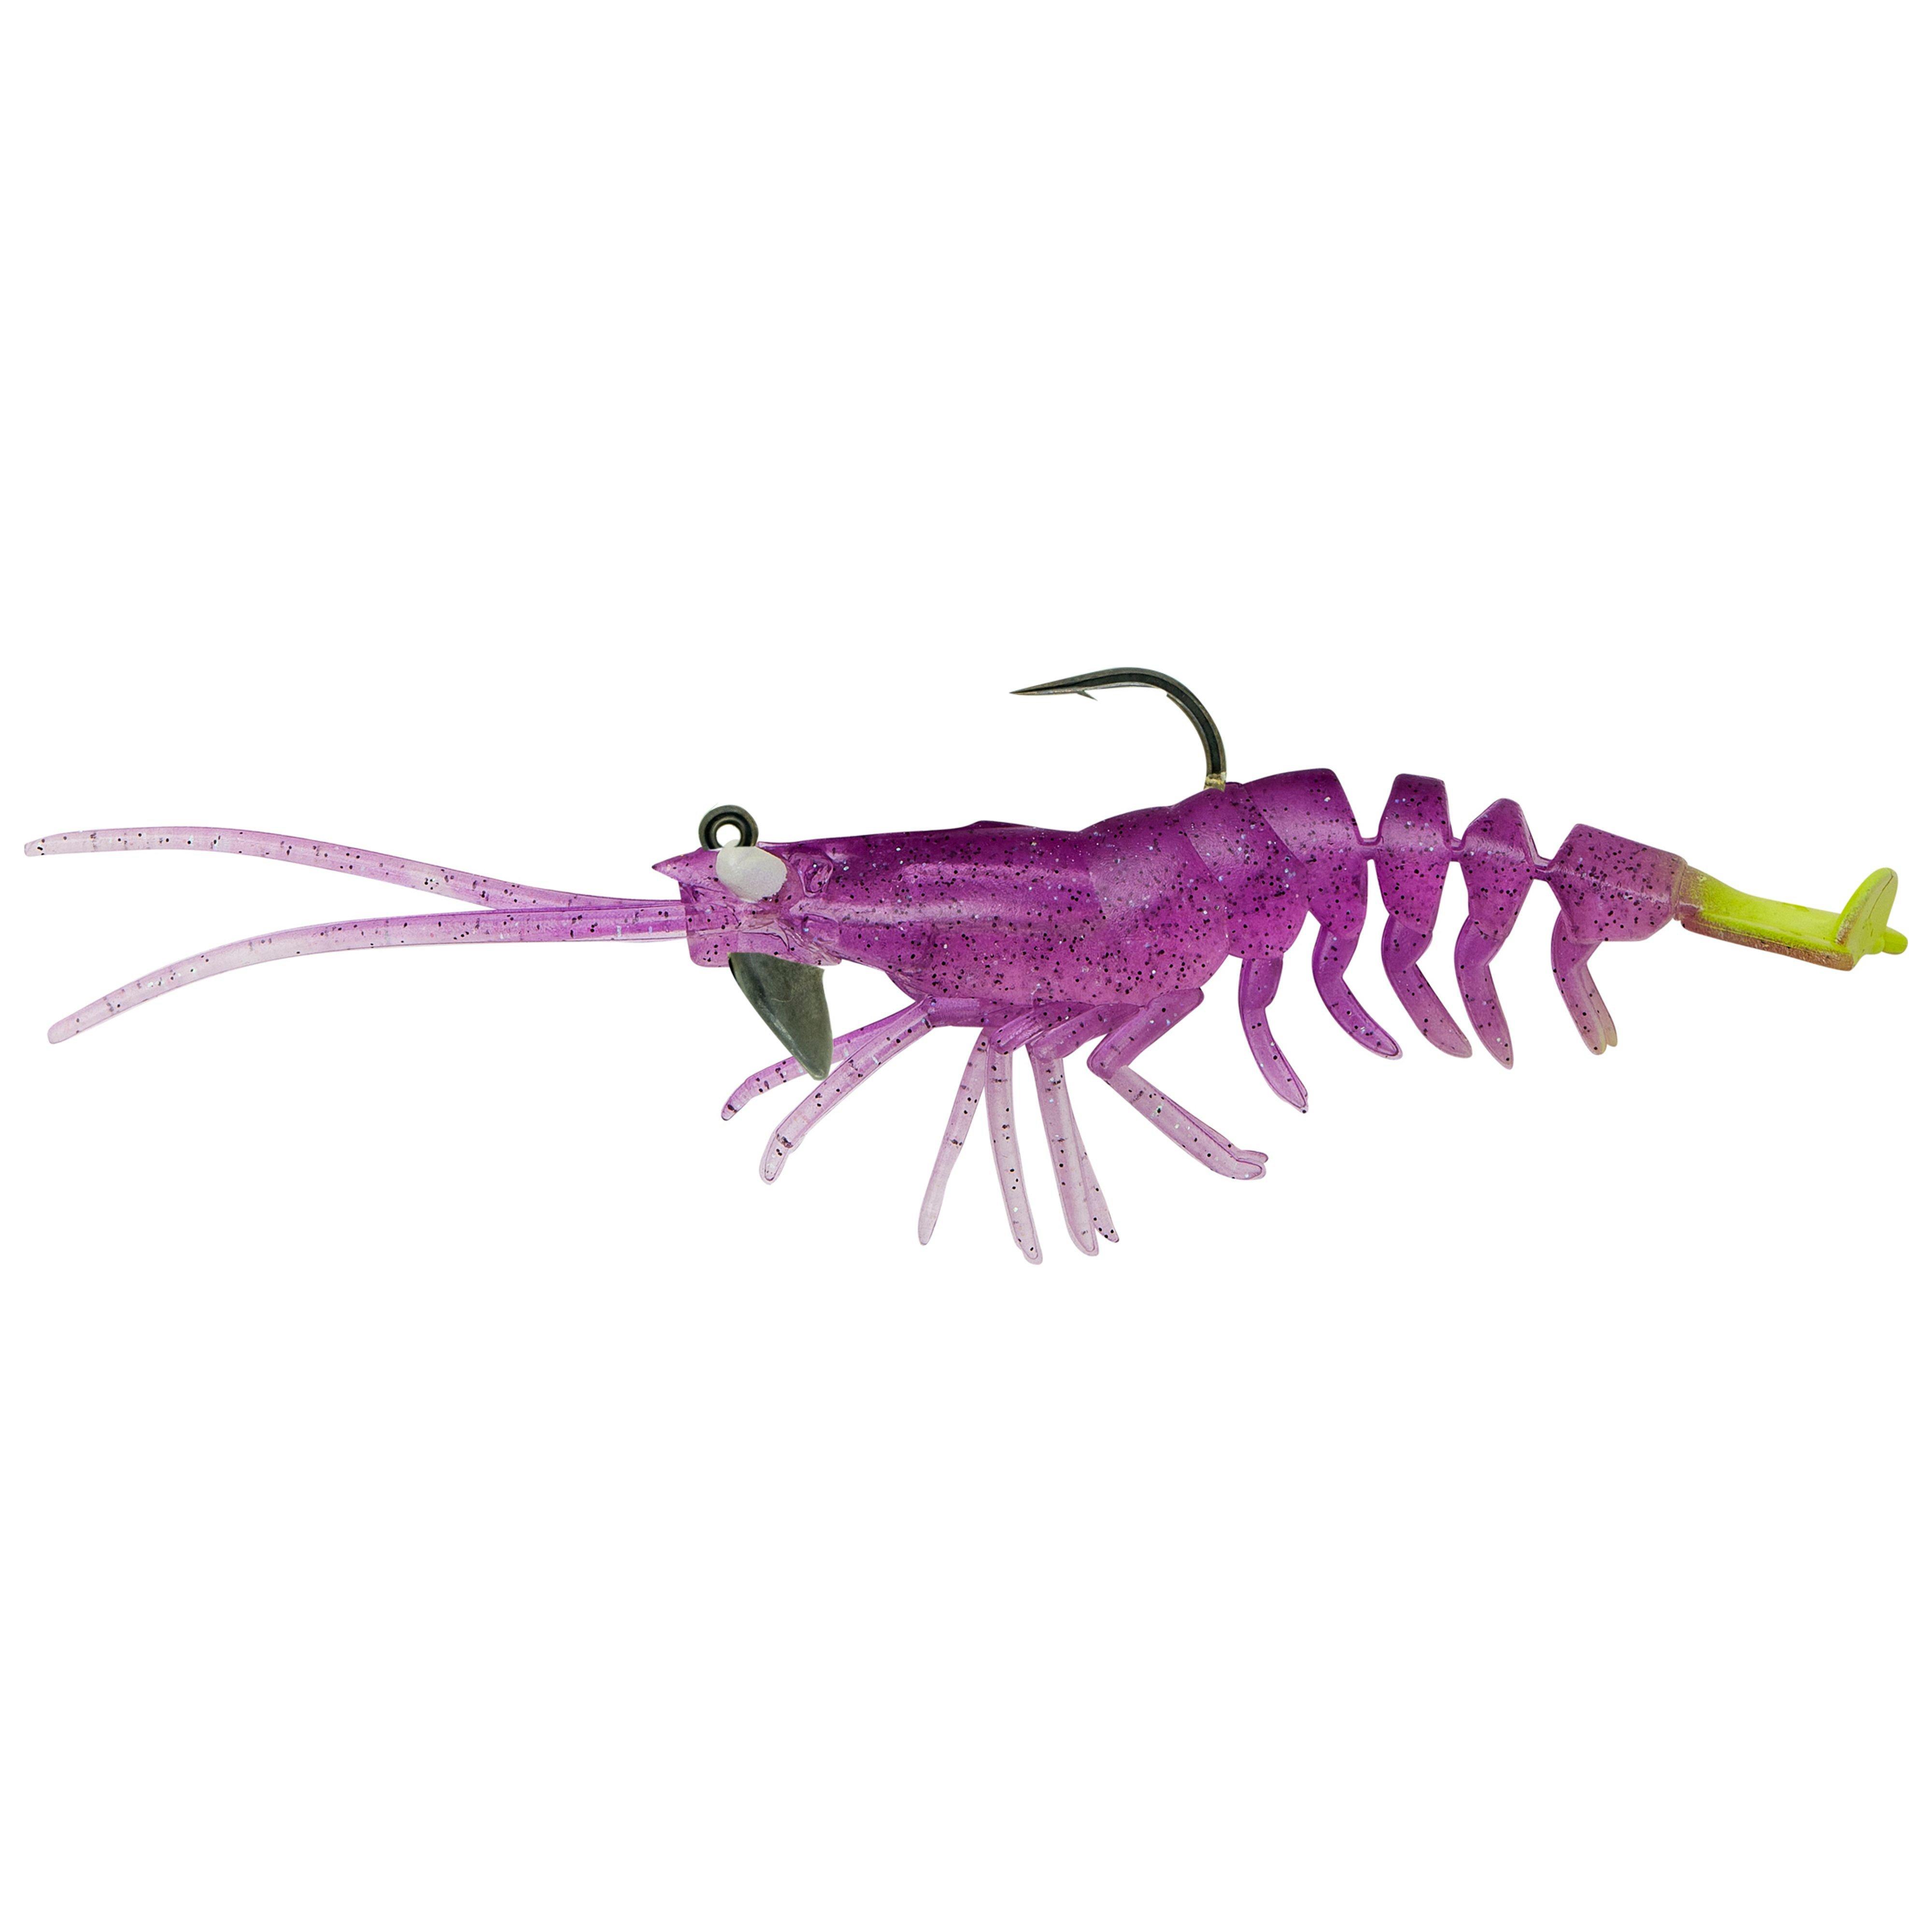  Savage Gear 3D Manic Shrimp Soft Plastic Fishing Bait, 1/2 oz,  Avocado, Realistic Contours, Colors and Movement, Durable Construction,  Weighted Ultra-Sharp EWG Hook : Sports & Outdoors